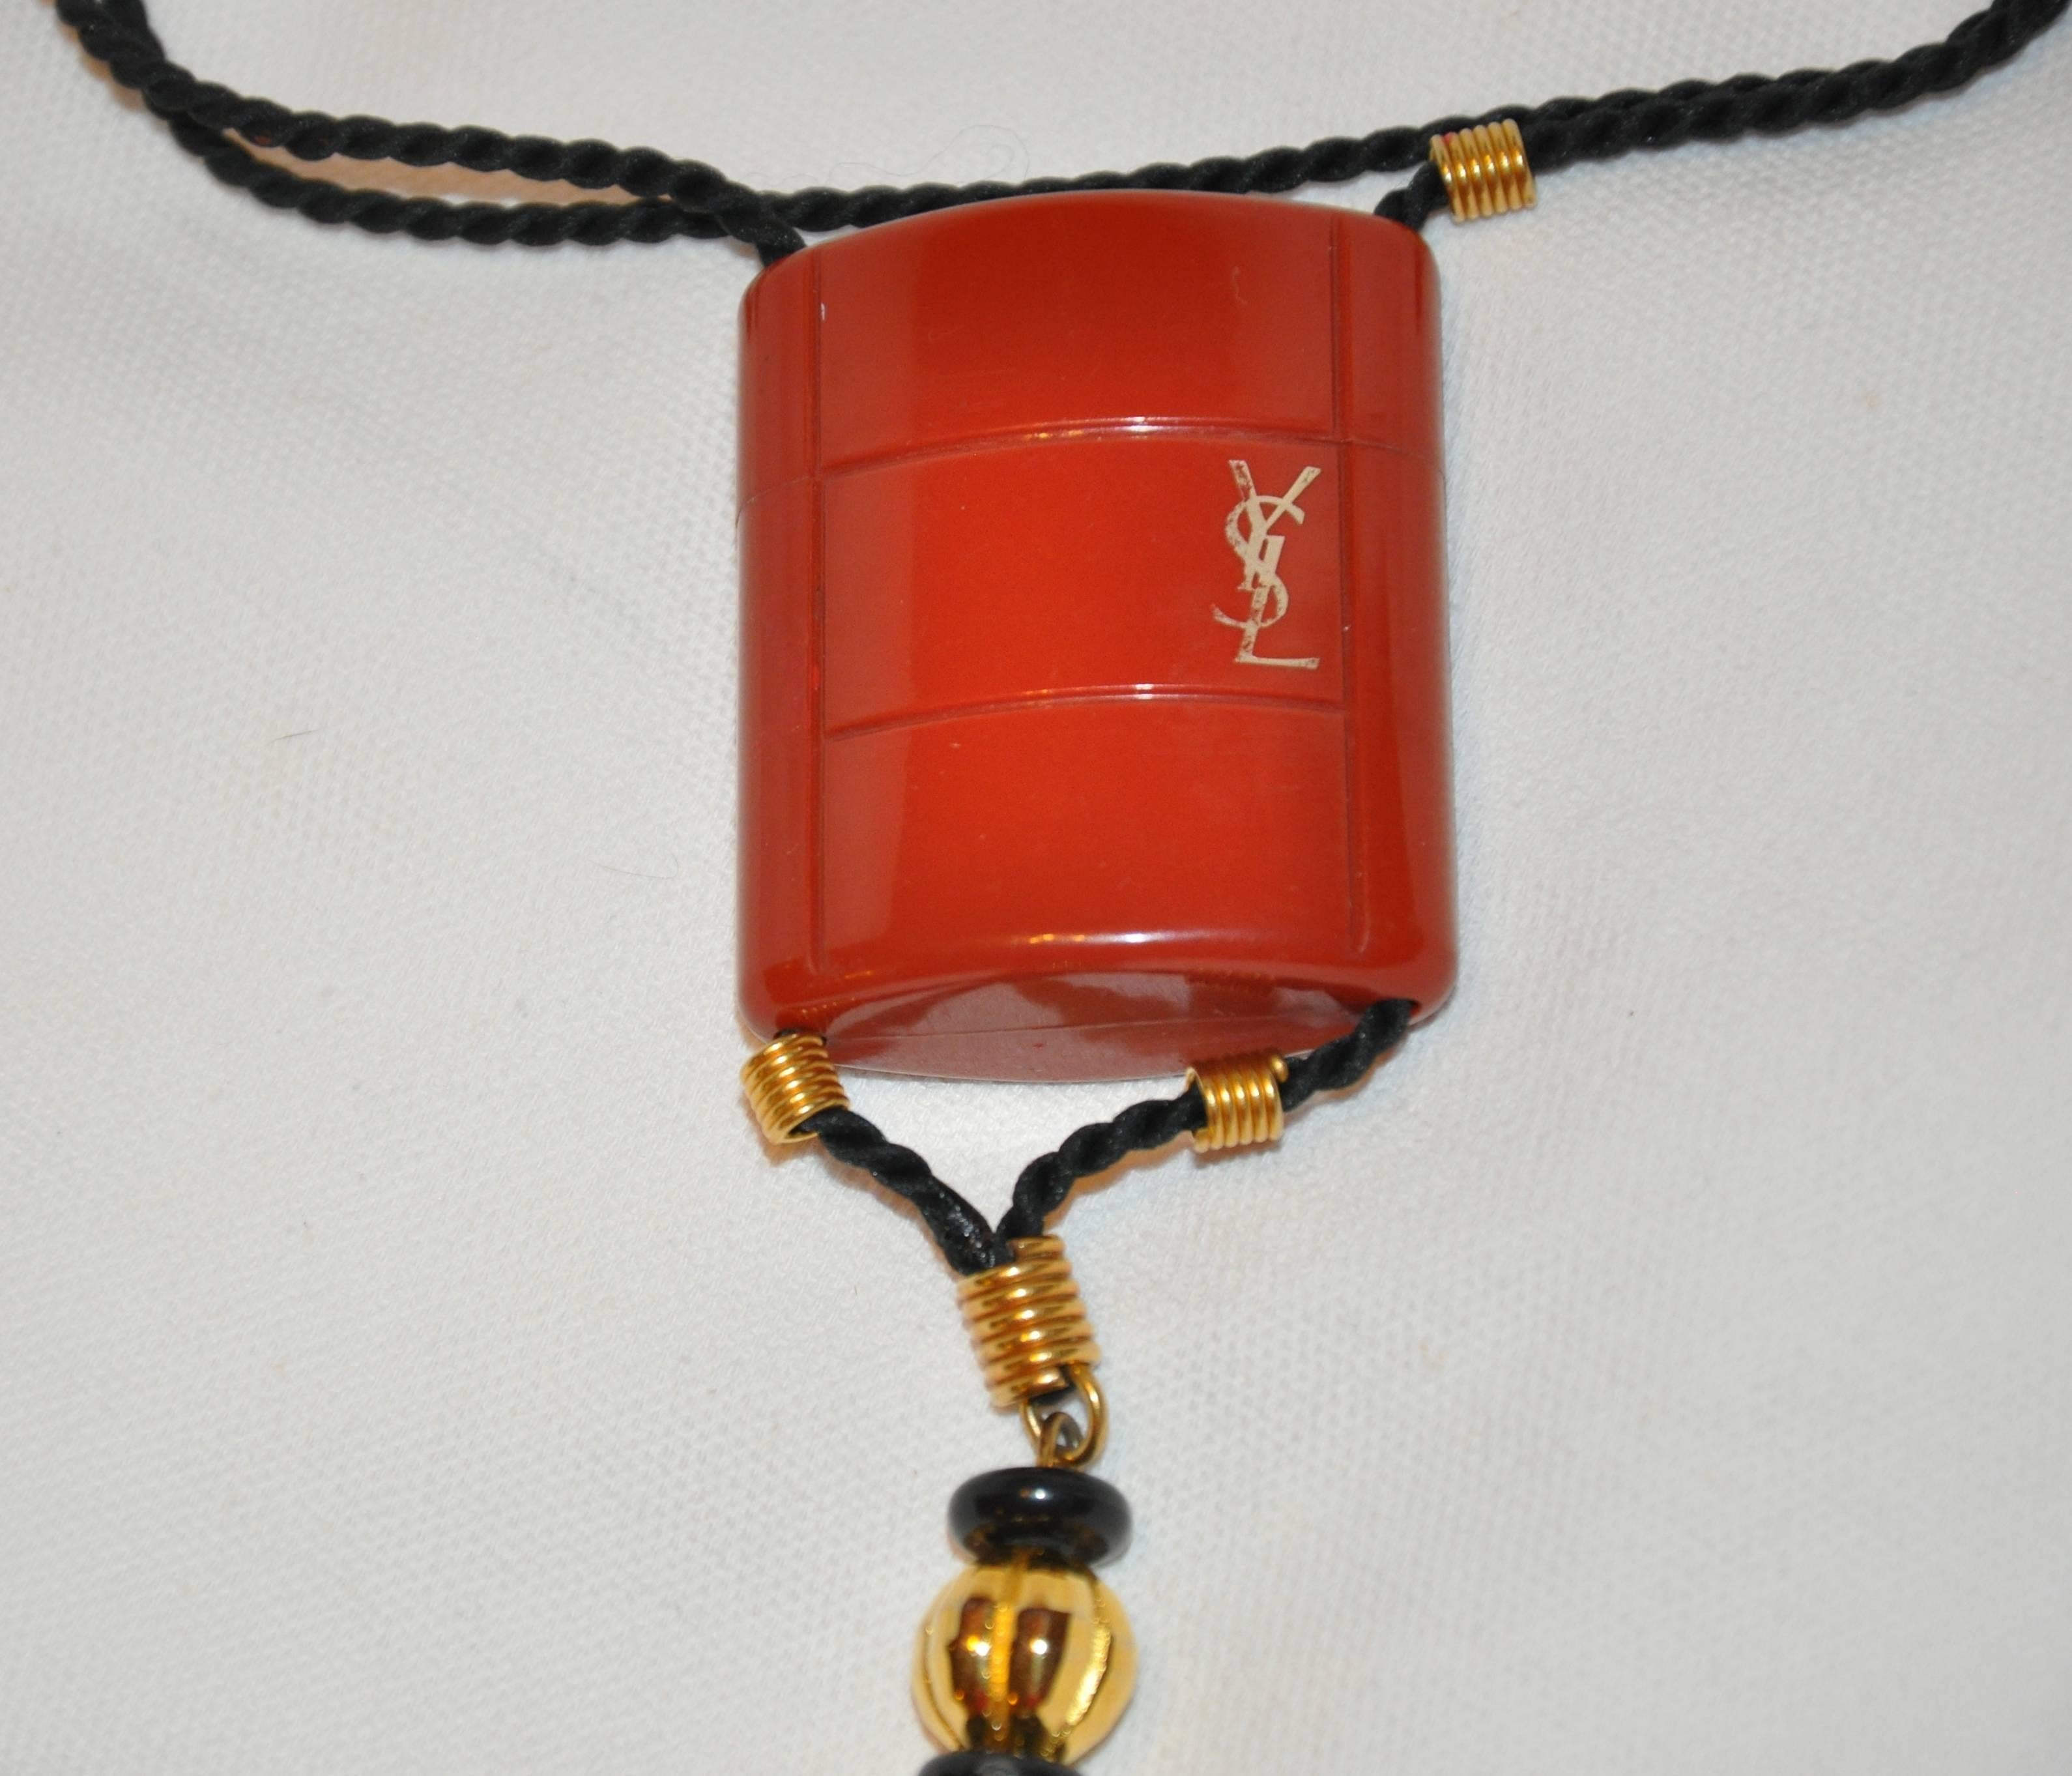        Yves Saint Laurent signature "Opium" collection perfume holder pendant with adjustable black silk cord necklace and black silk tassel detailed with gilded gold accents. The pendant with tassel measures 6 1/2 inches in length and 1